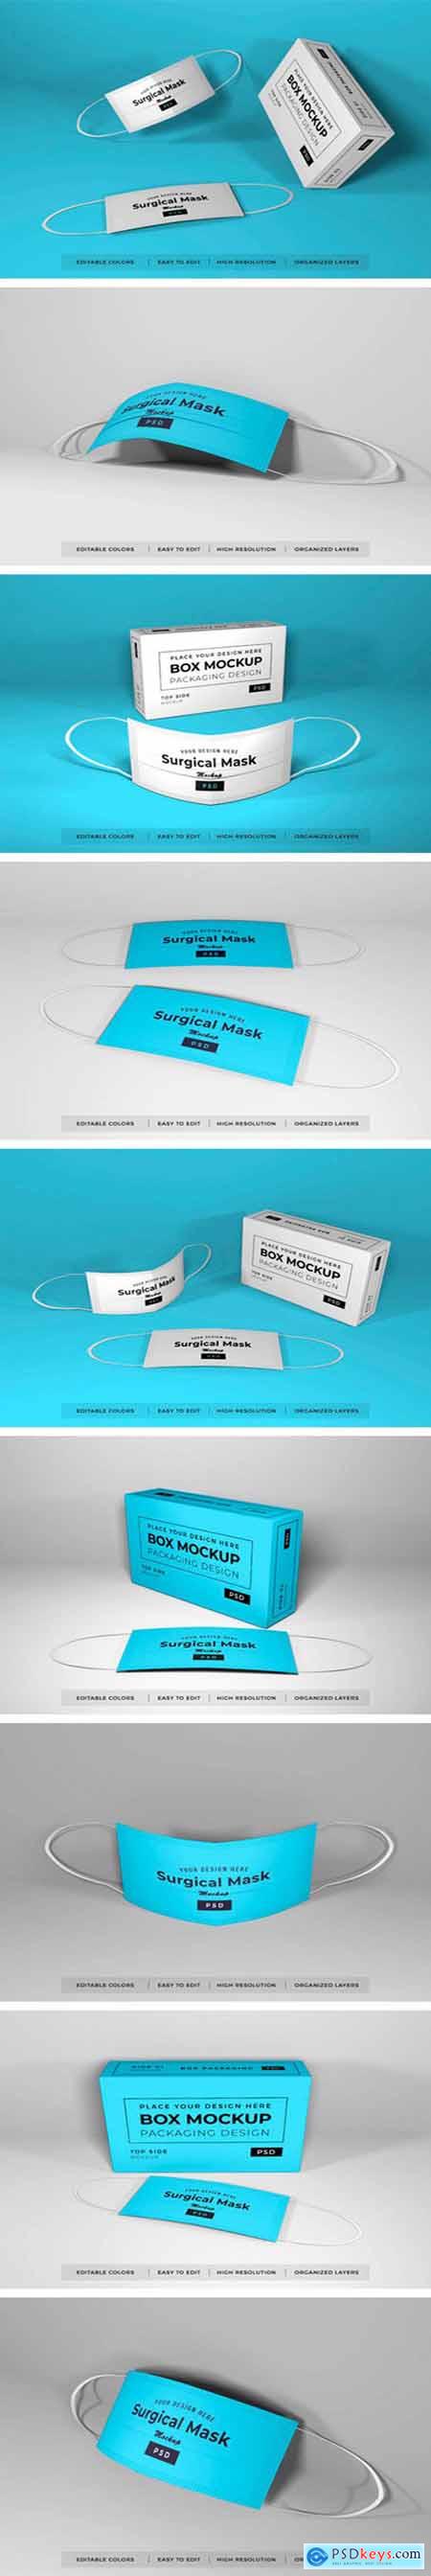 Realistic Surgical Mask Mockup Templates